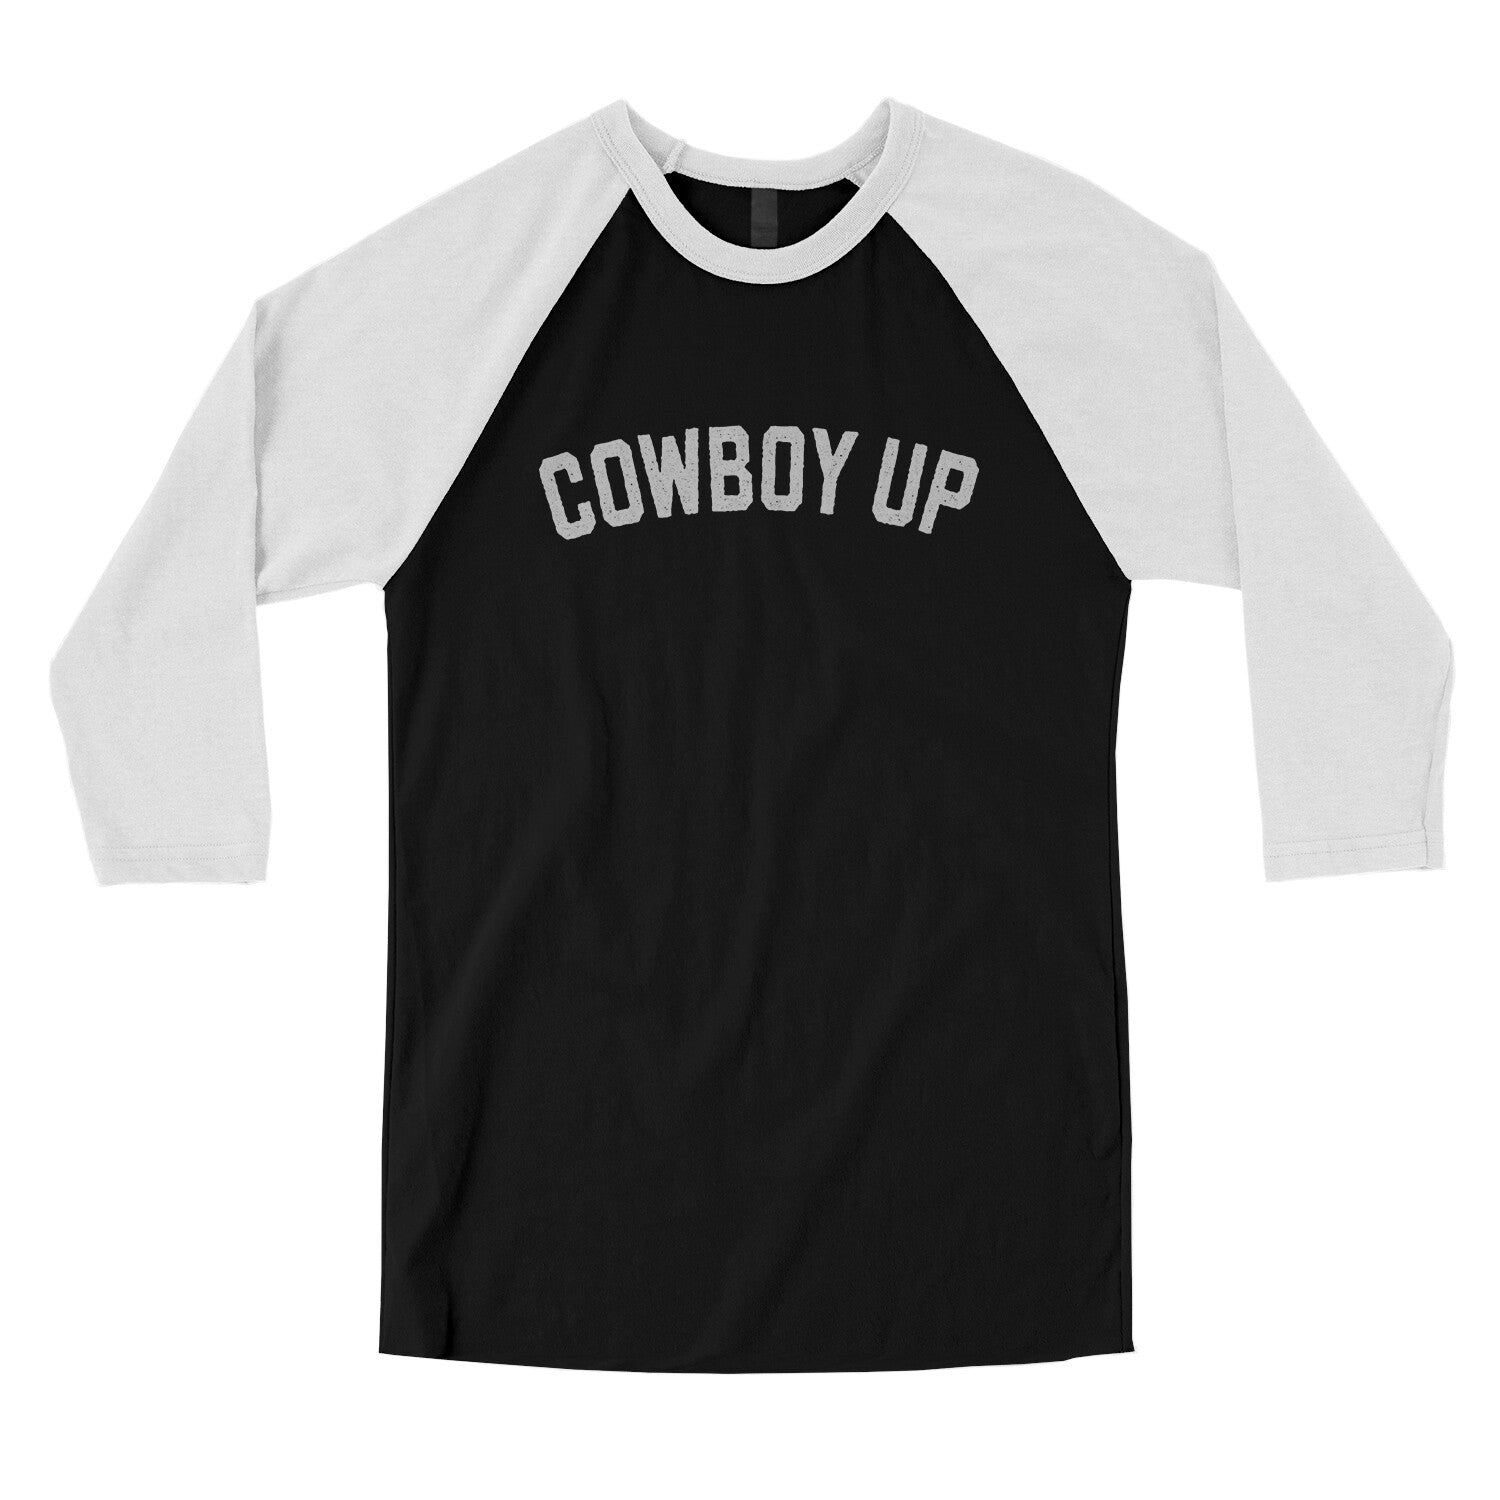 Cowboy Up in Black with White Color